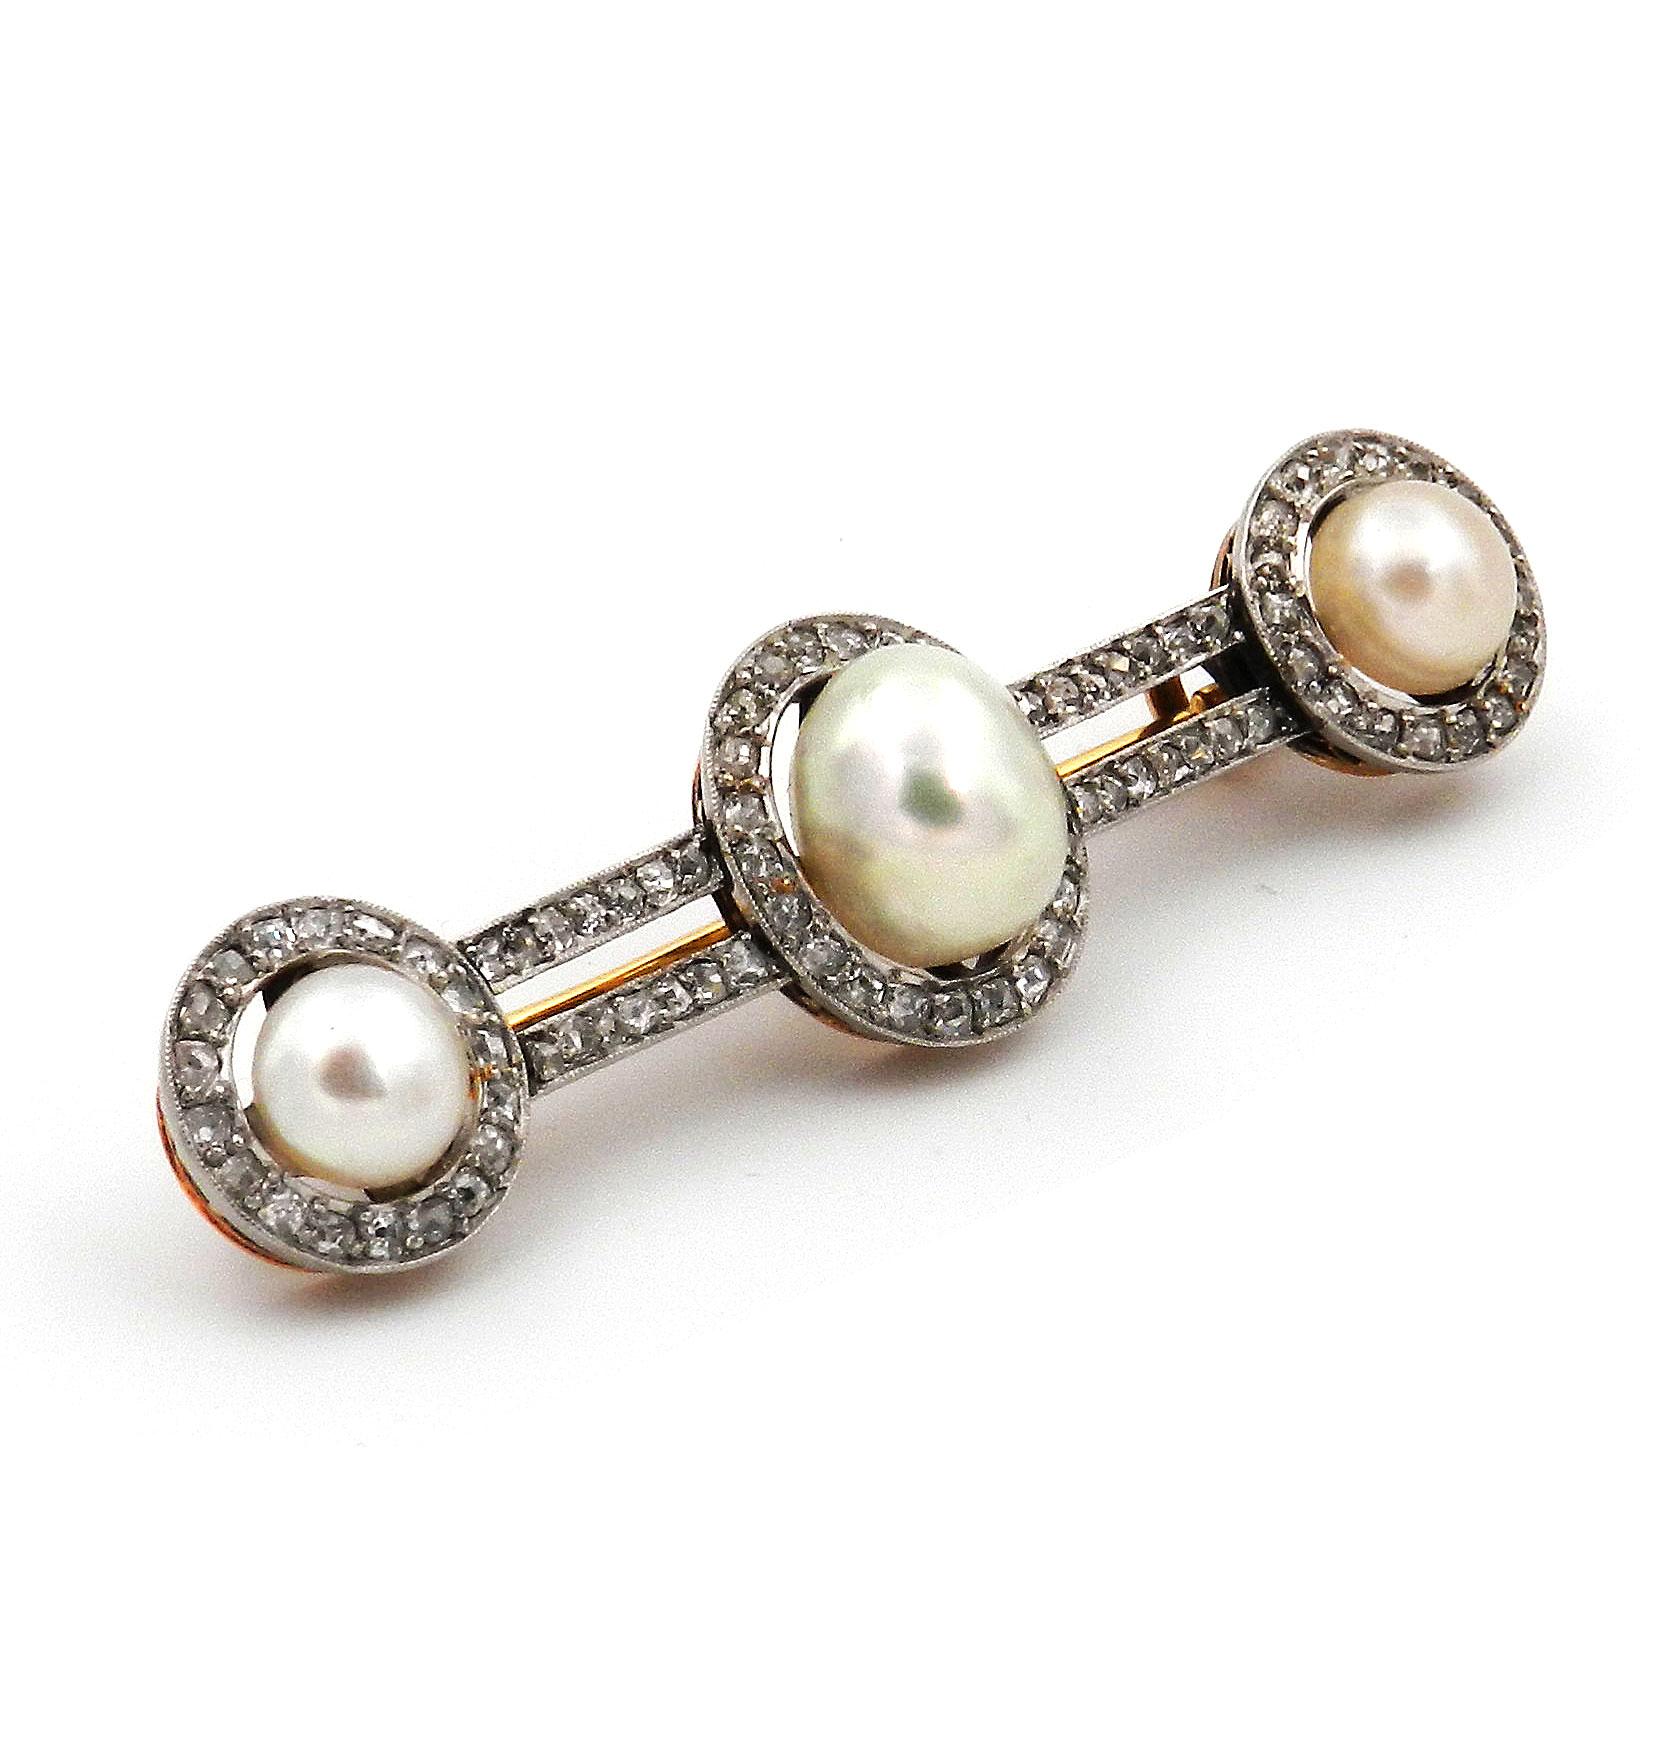 Art Deco Natural Pearl Diamond Brooch in Platinum and 18K Gold, circa 1920

Decorative bar brooch set with three oval natural pearls in a fine entourage of rose cut diamonds set in platinum on 18K rose gold.

 

18 K gold and platinum
3 natural